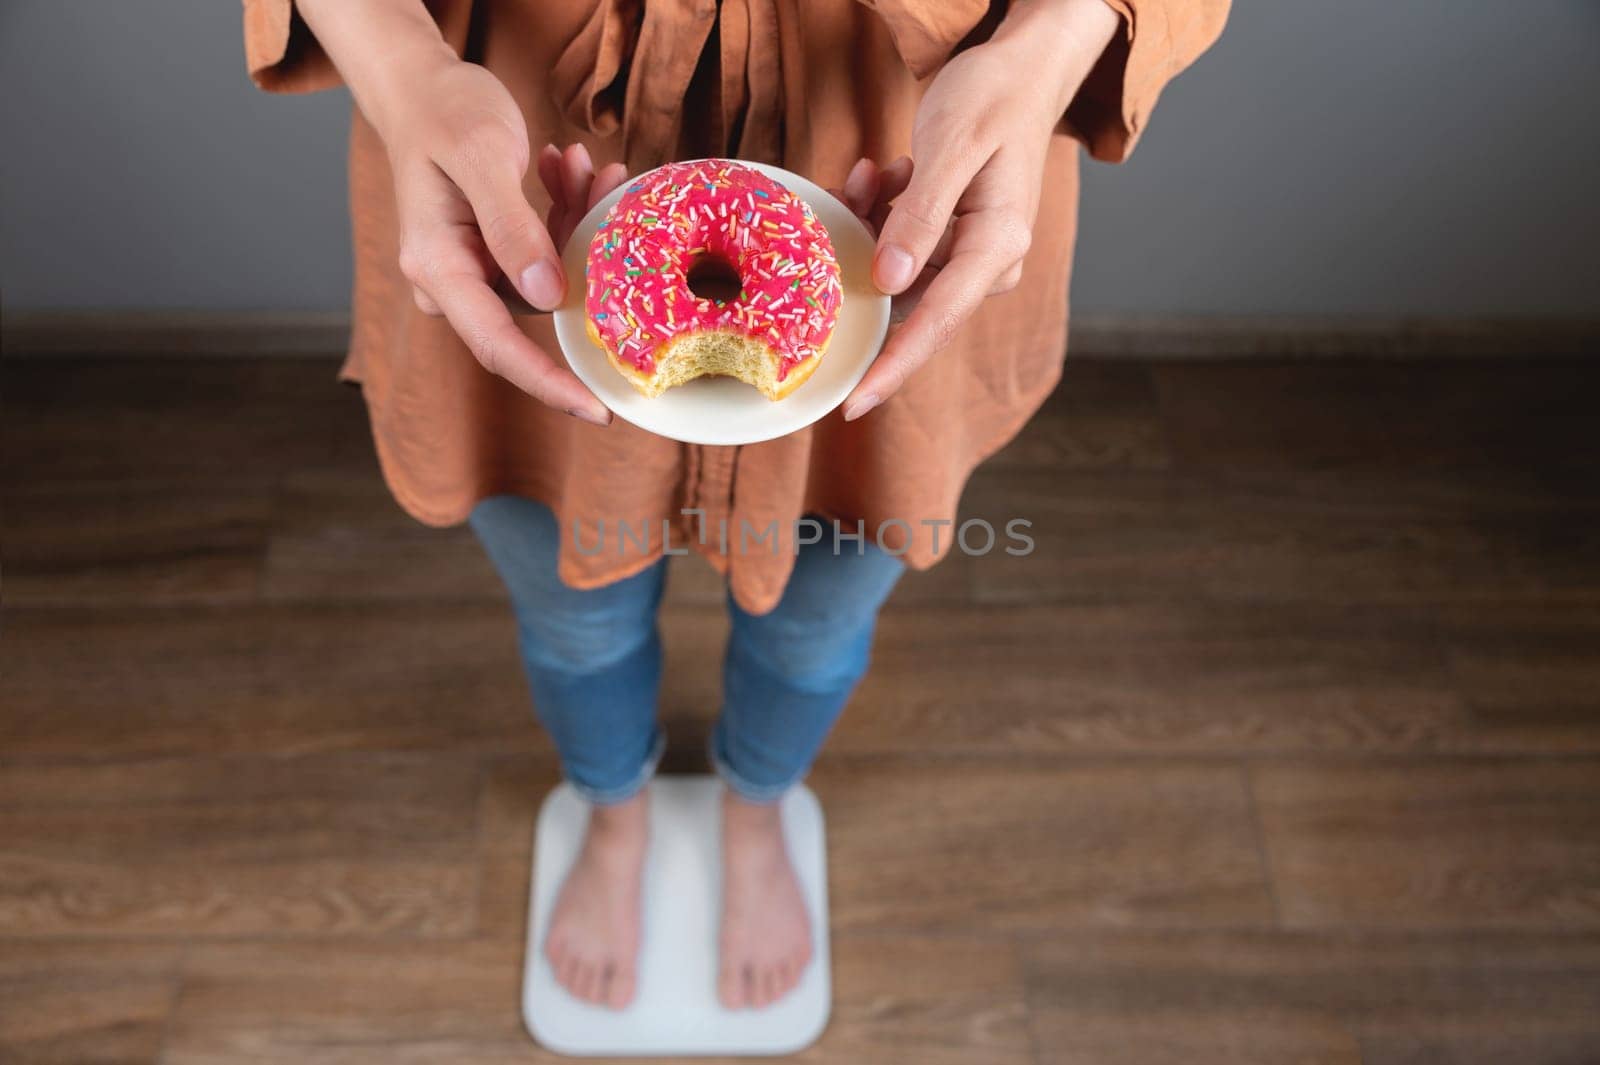 Diet. A woman measures body weight on a scale, holding a donut on a plate. Sweets, unhealthy junk food. Diet, healthy eating, lifestyle. Weight loss. Obesity. View from above.